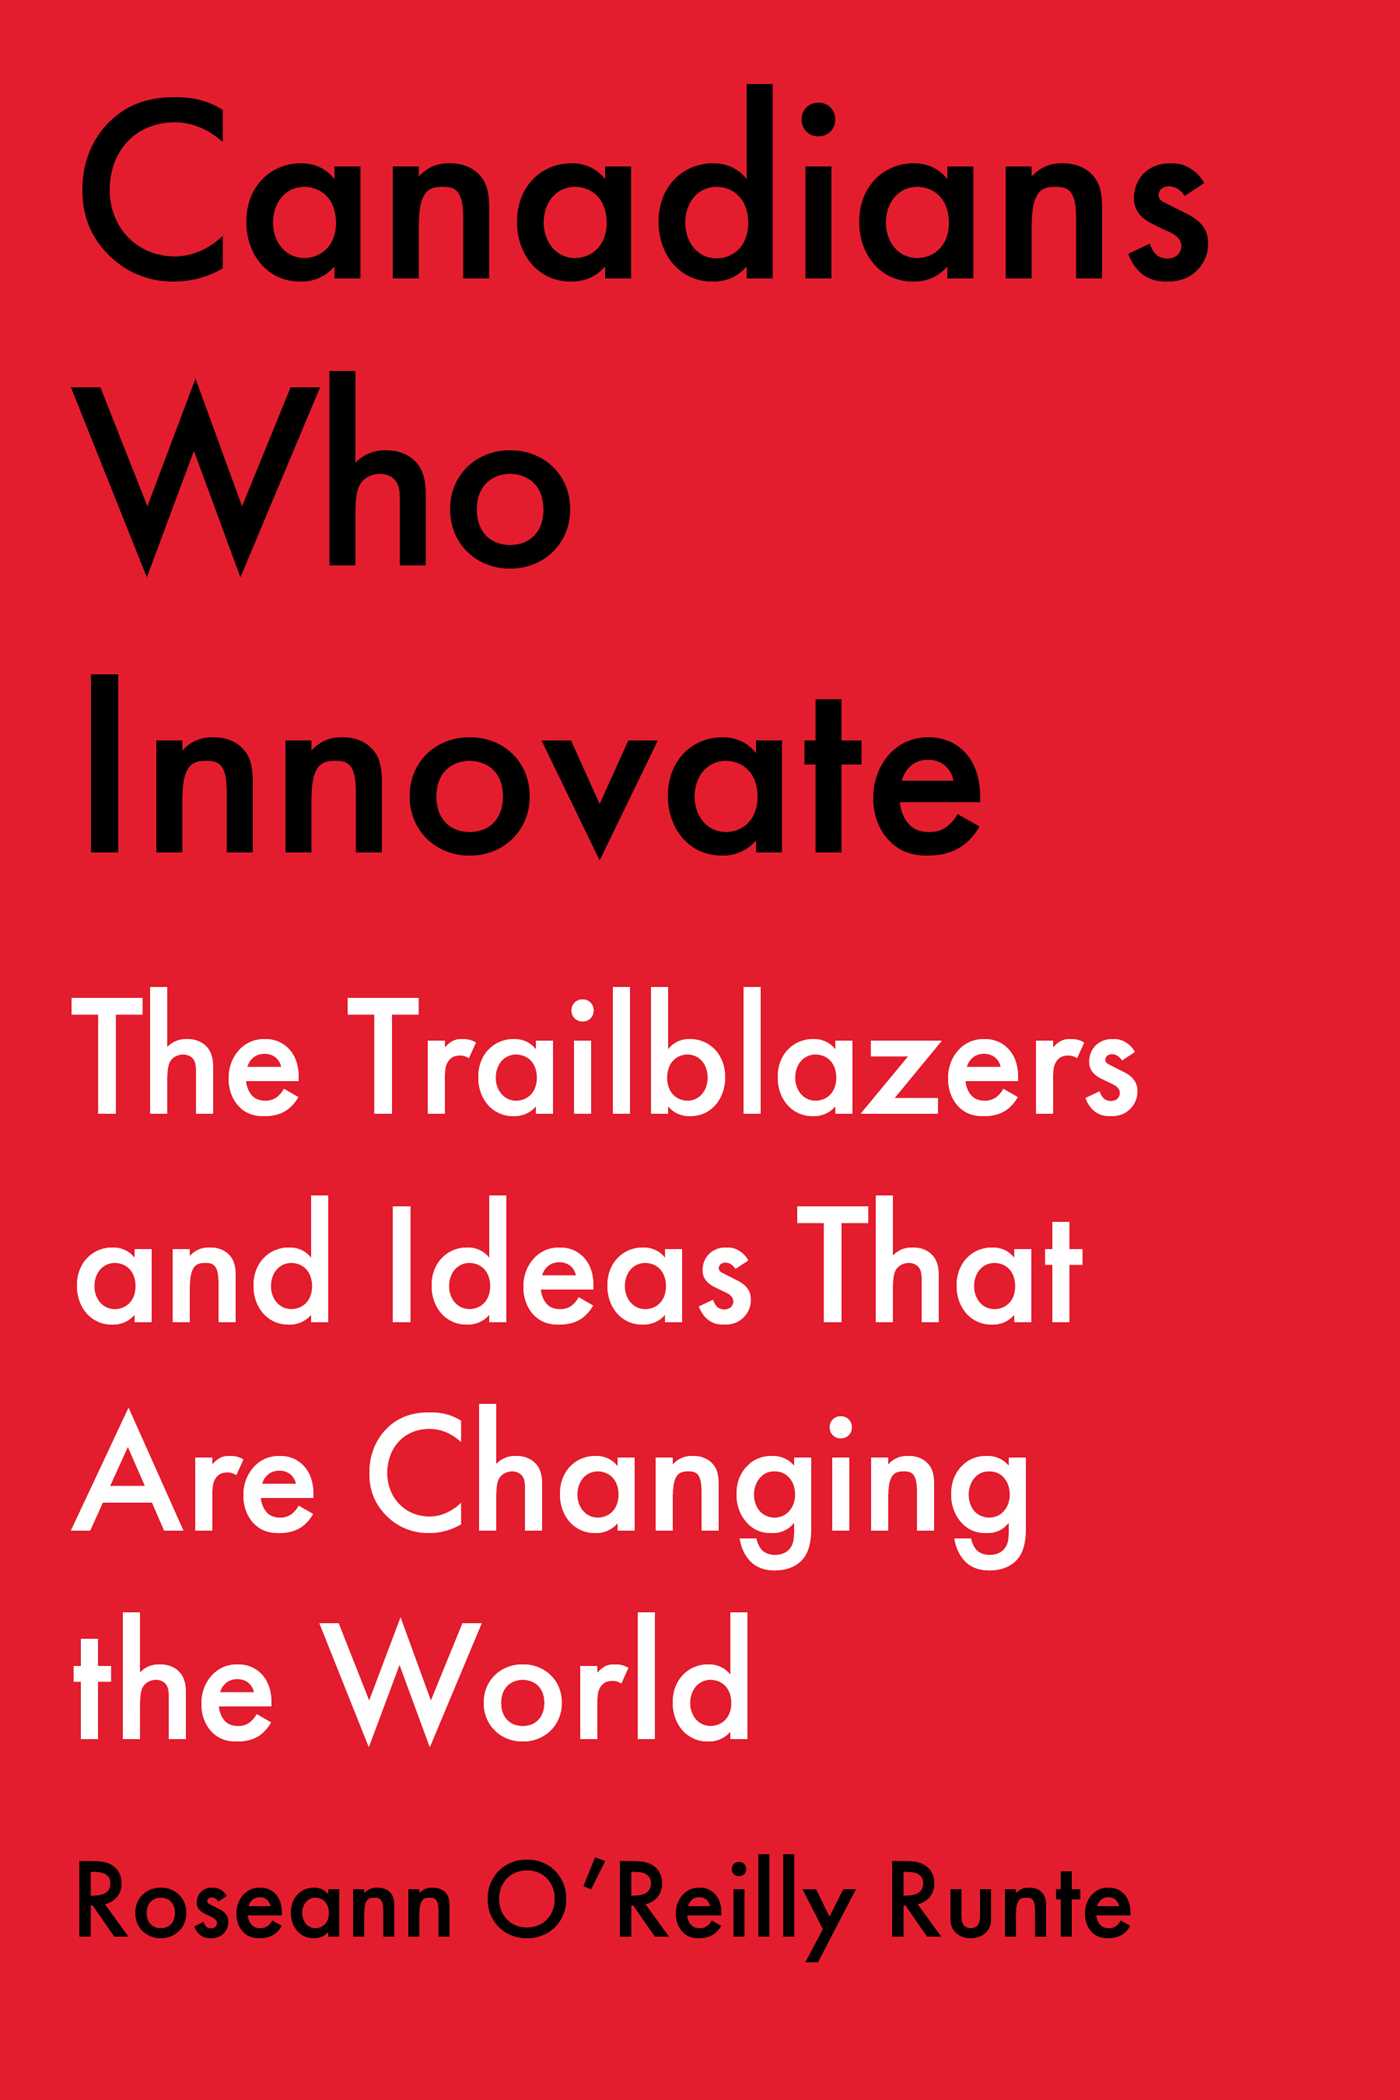 CANADIANS WHO INNOVATE : THE TRAILBLAZERS AND IDEAS THAT ARE CHANGING THE WORLD